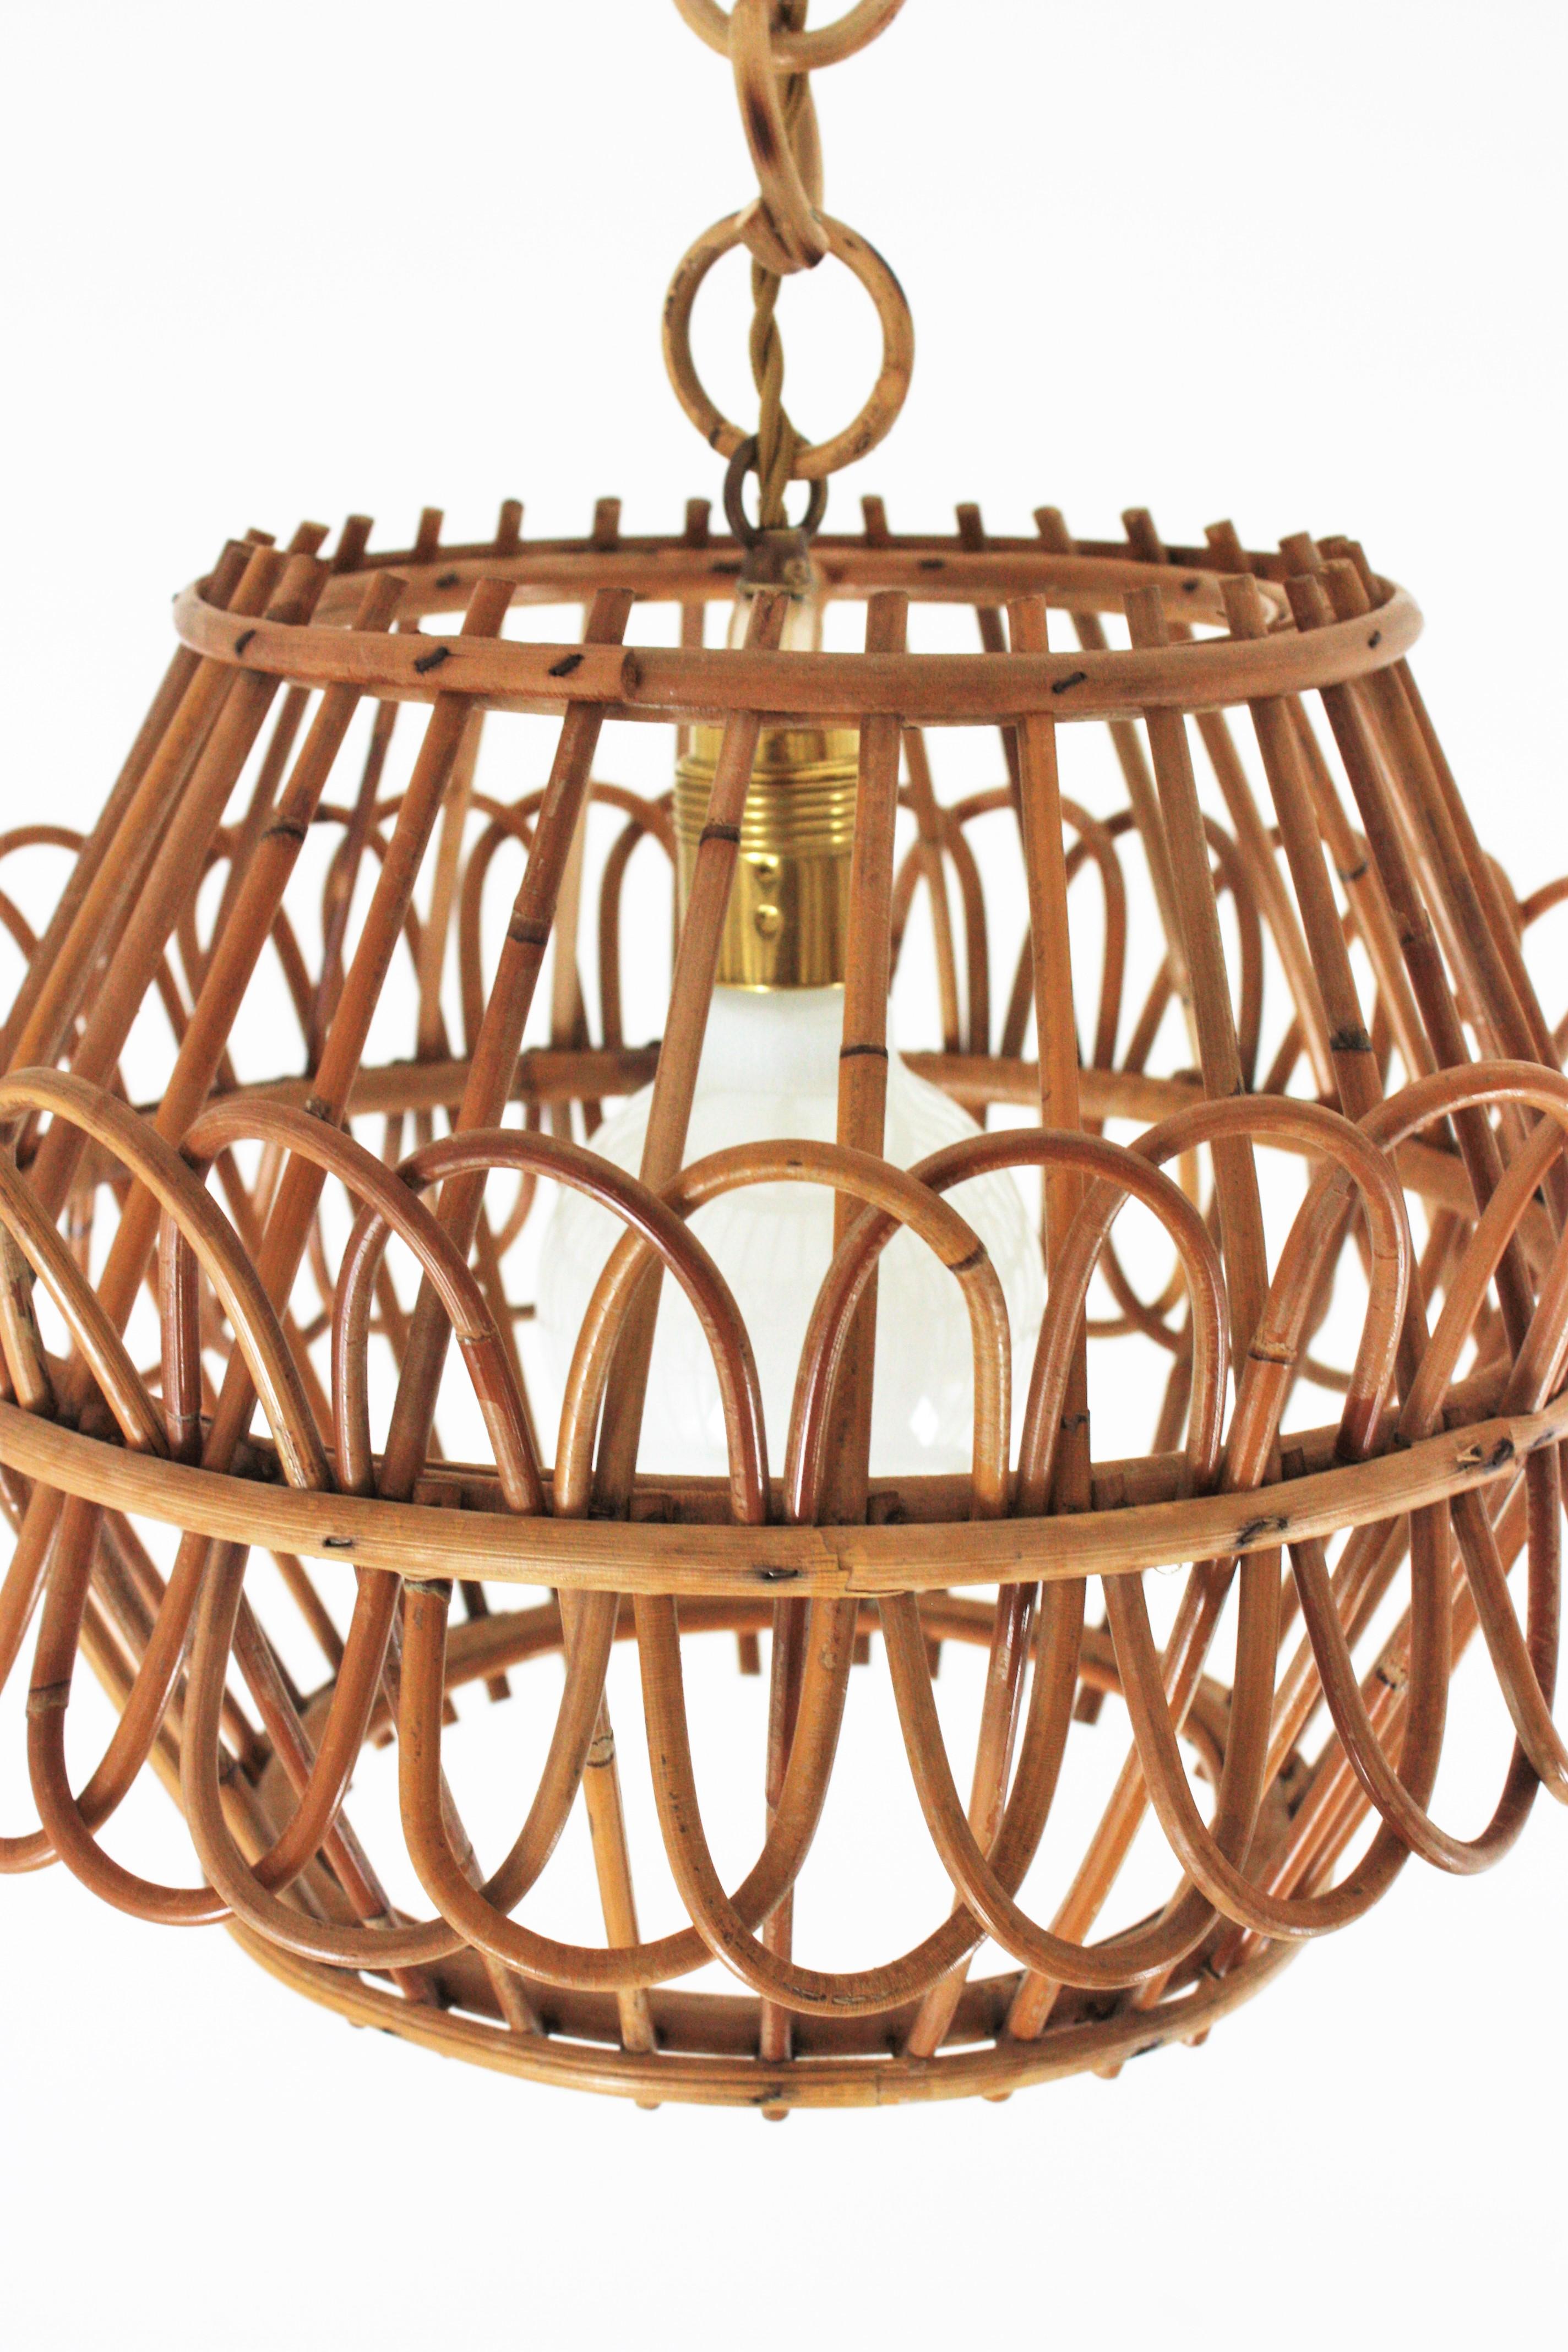 French Pendant Light or Lantern in Rattan, 1950s For Sale 4